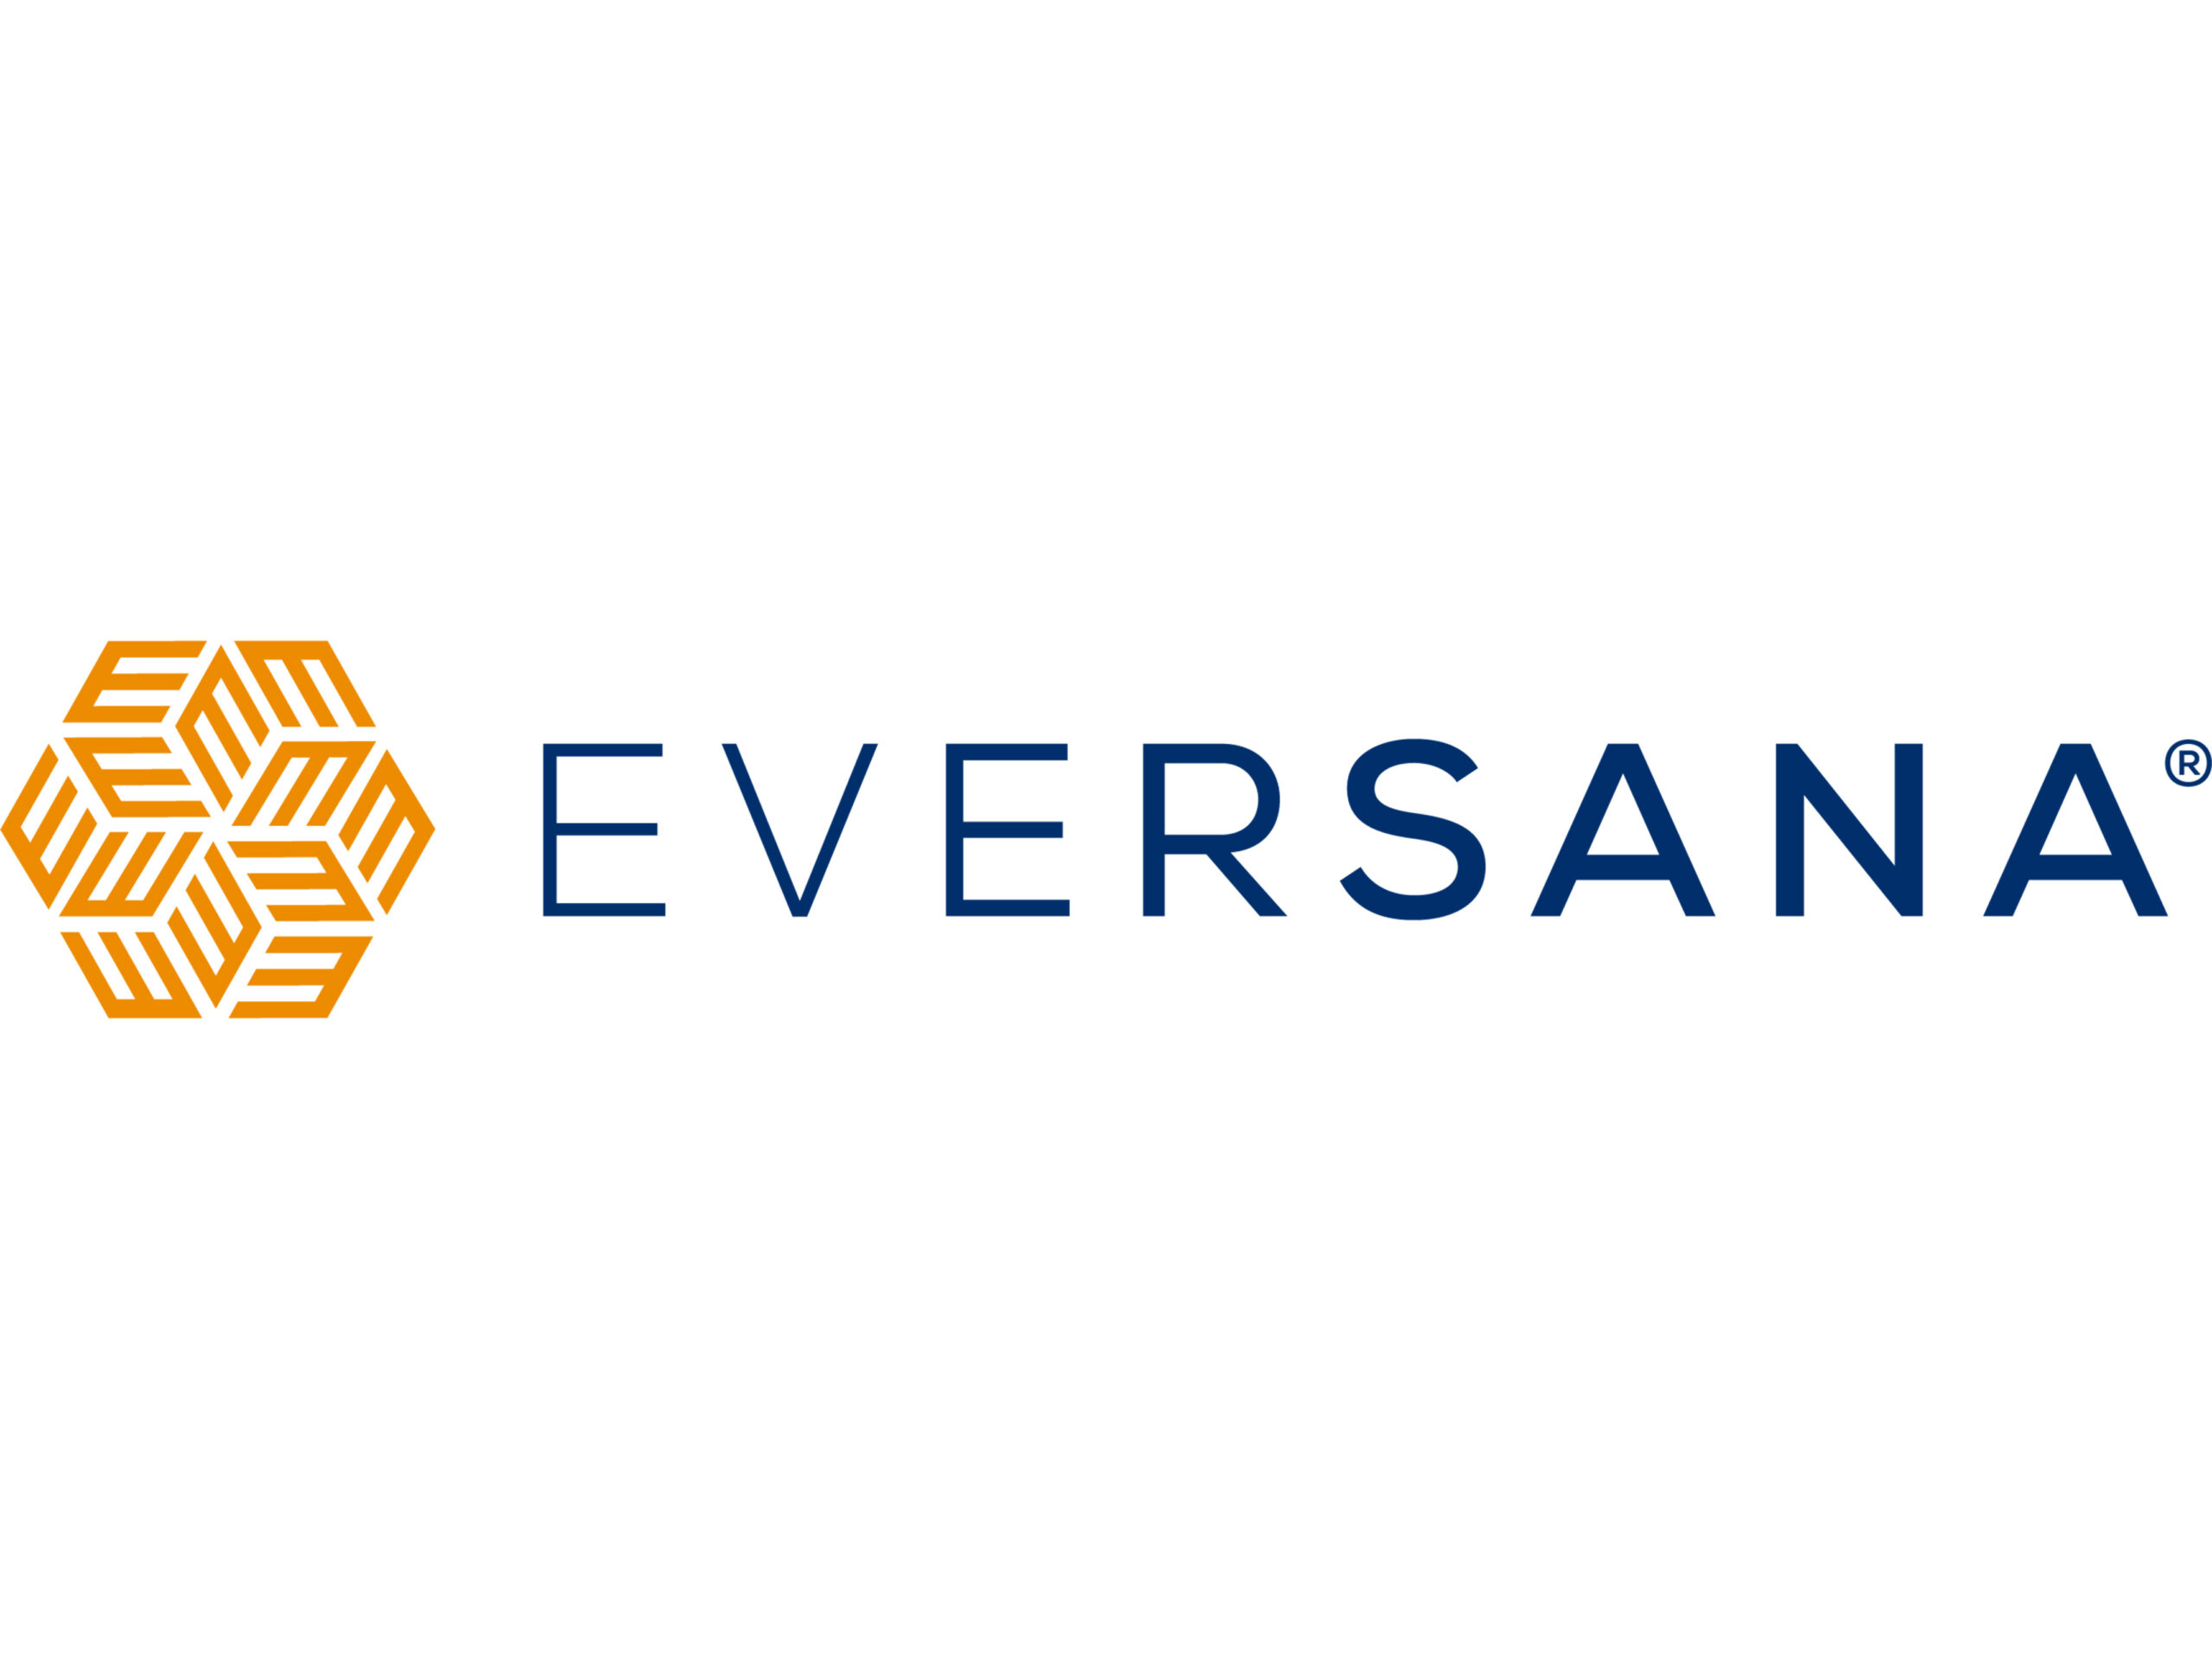 Logo for EVERSANA, which introduced new AI tool